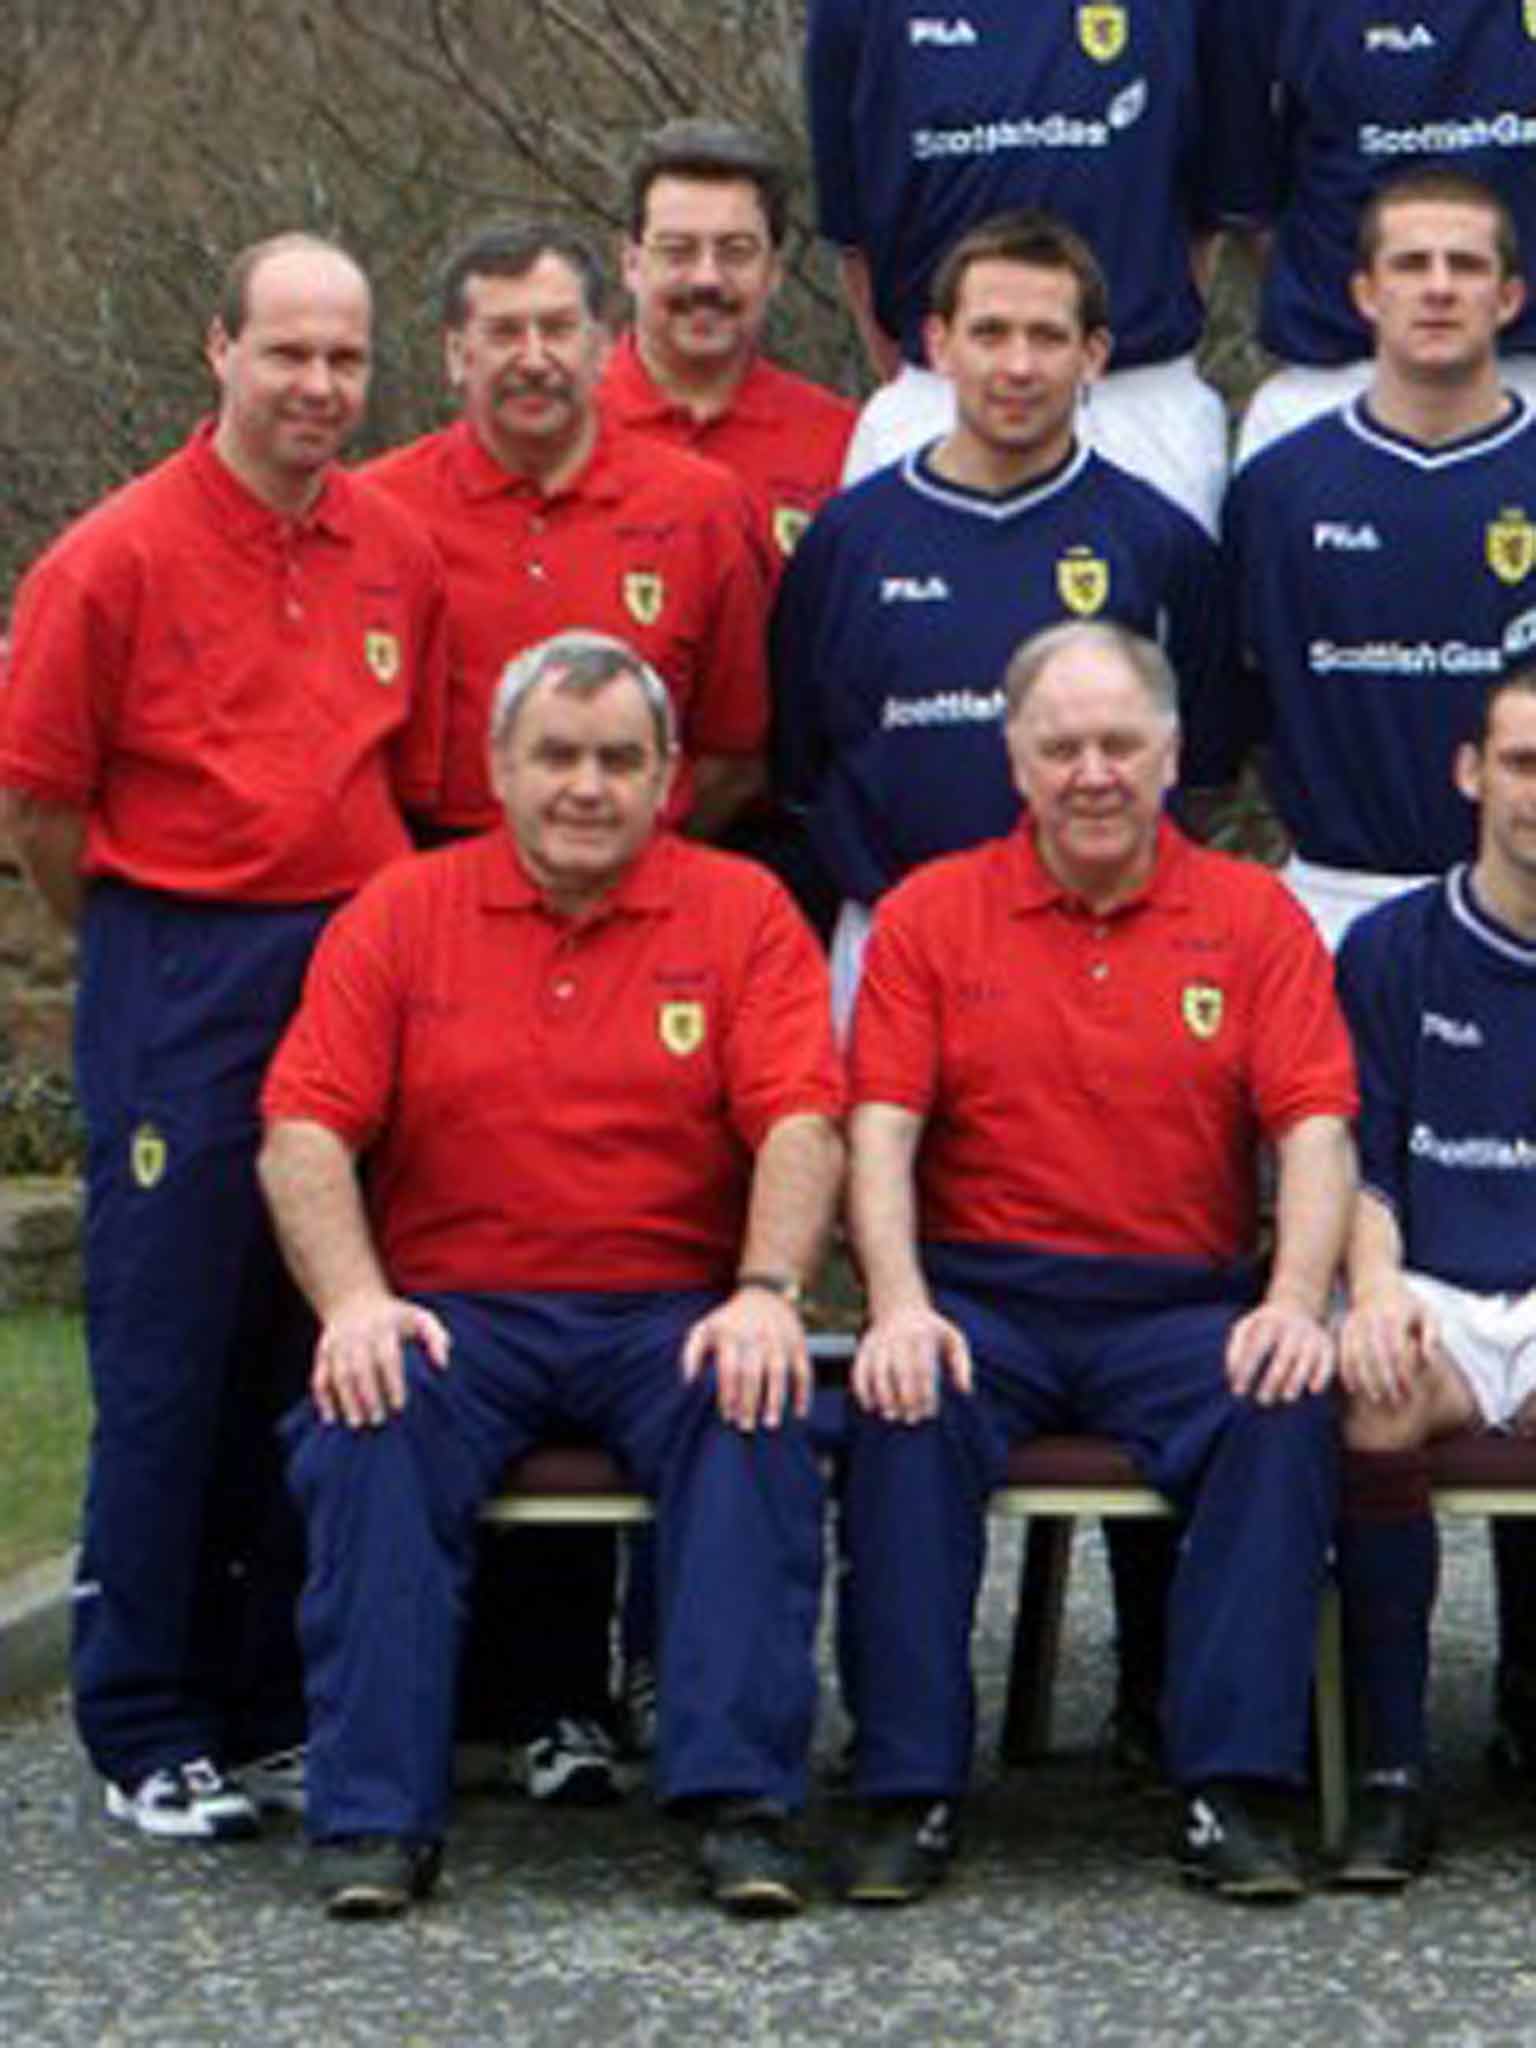 Hillis,second row, second from left, with some of the Scotland back-up team